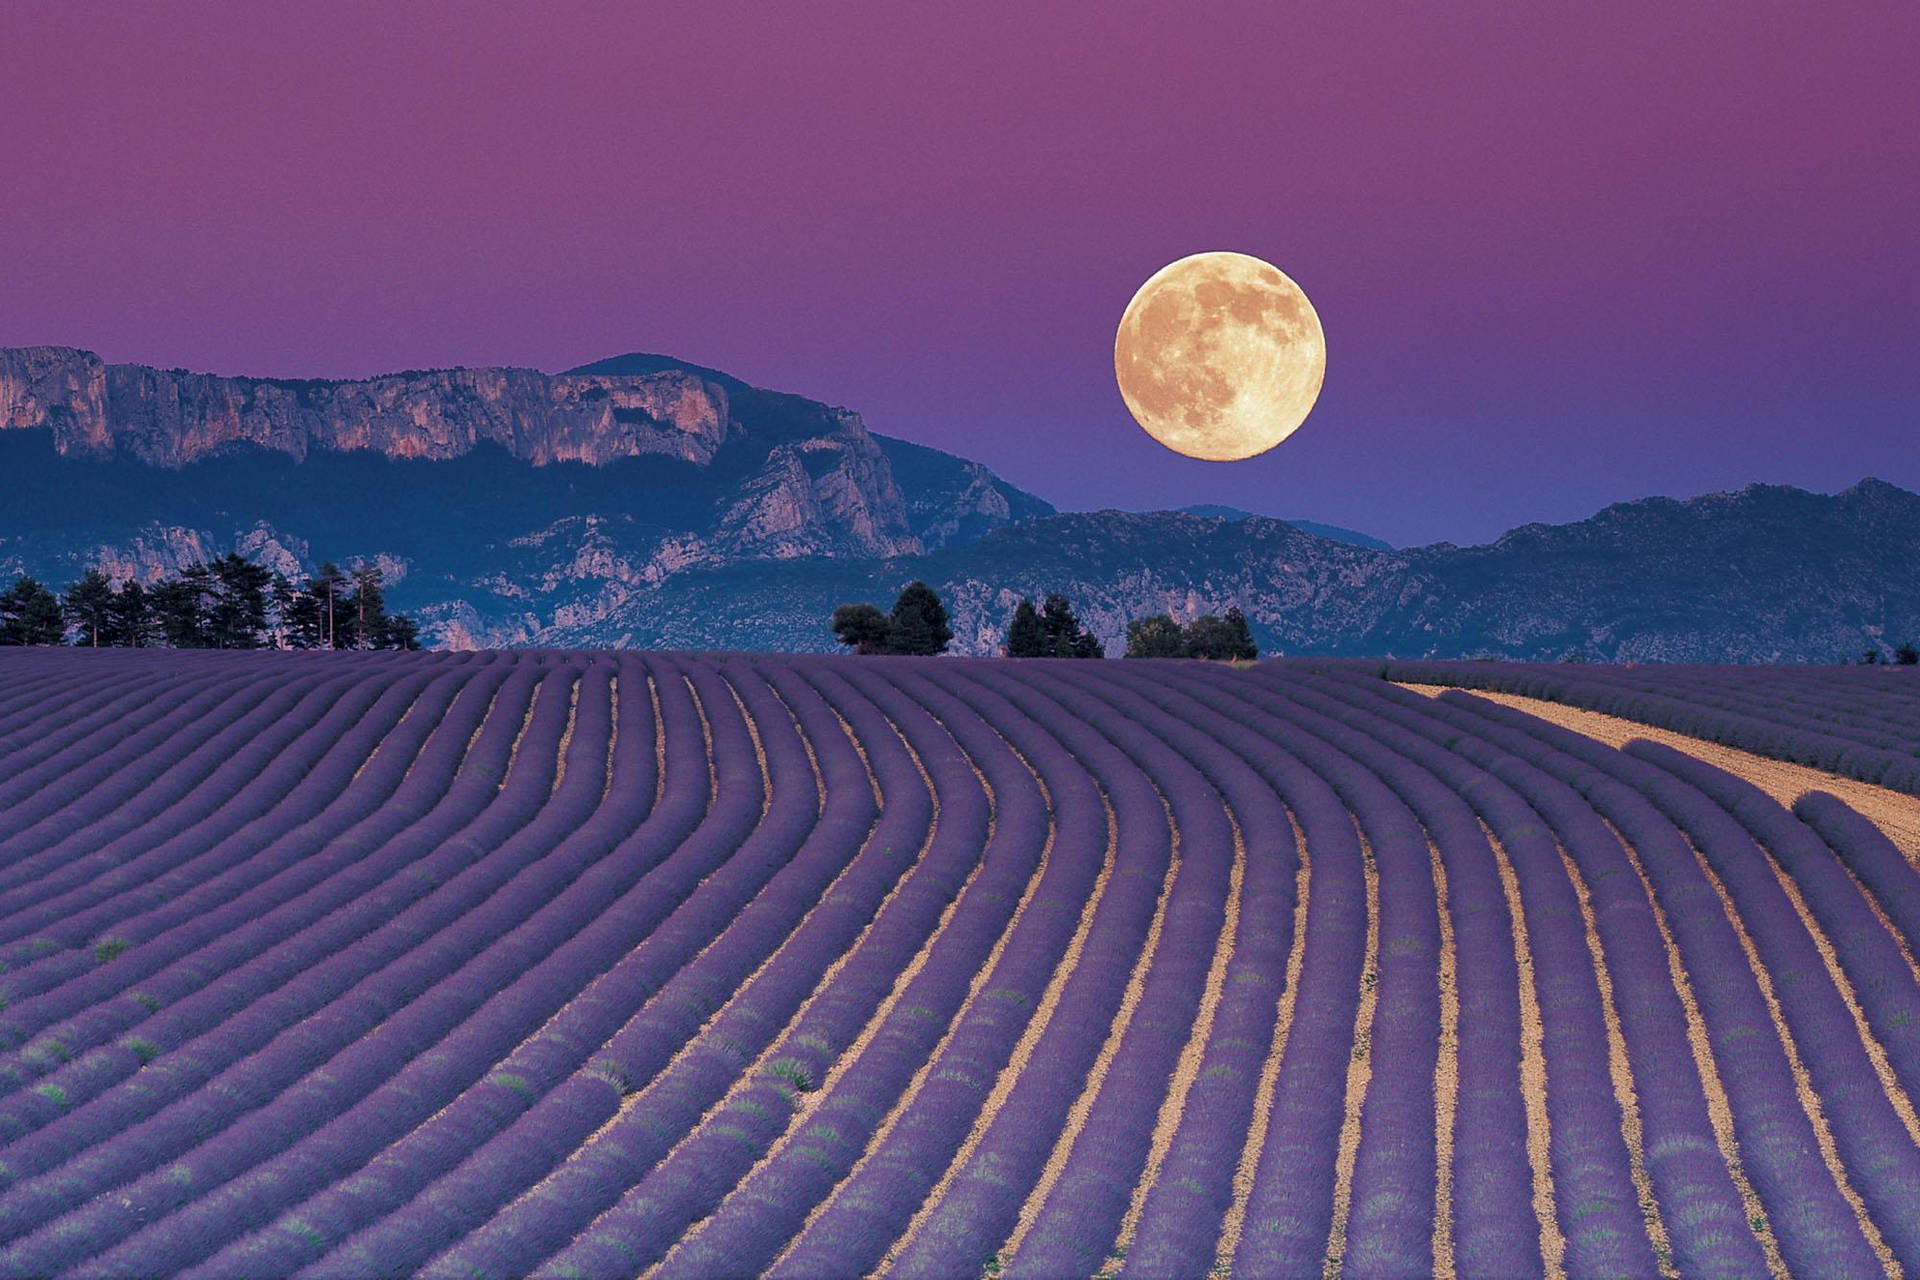 Lavender Aesthetic Field And A Full Moon